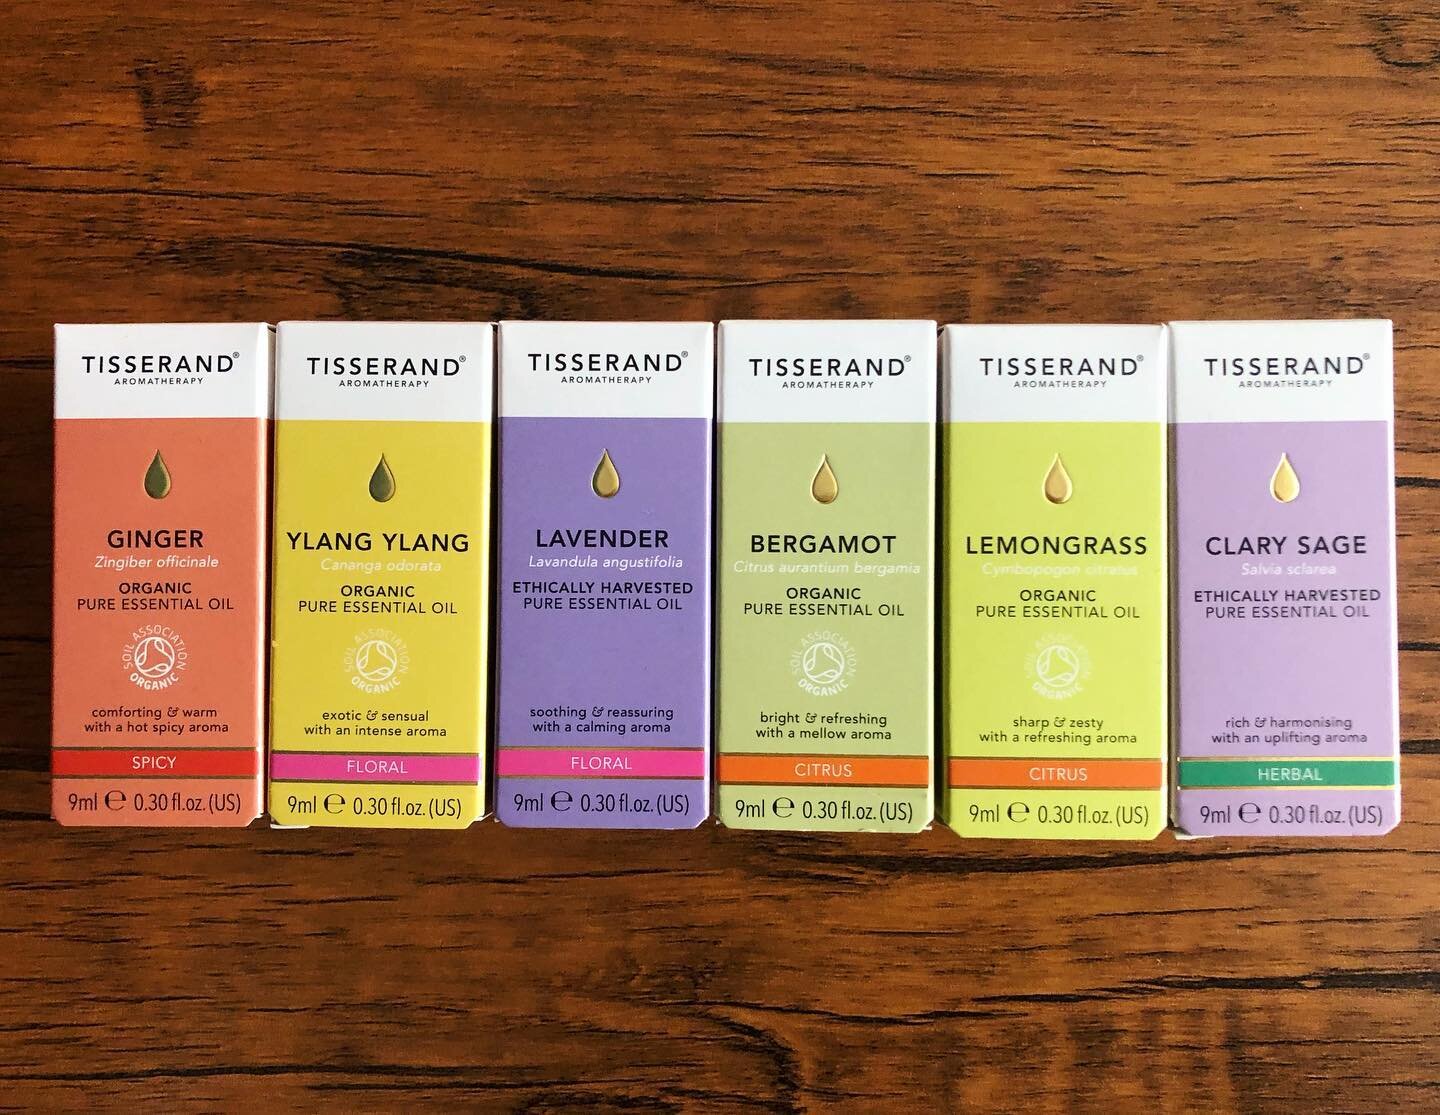 Really excited to start blending with my new @tisseranduk essential oils 😍💕🌸
I always like to get a mix of floral, herbal, citrus and spicy, as for each dosha type I need a different balance of the elements.
For my standard massage oils I love to 